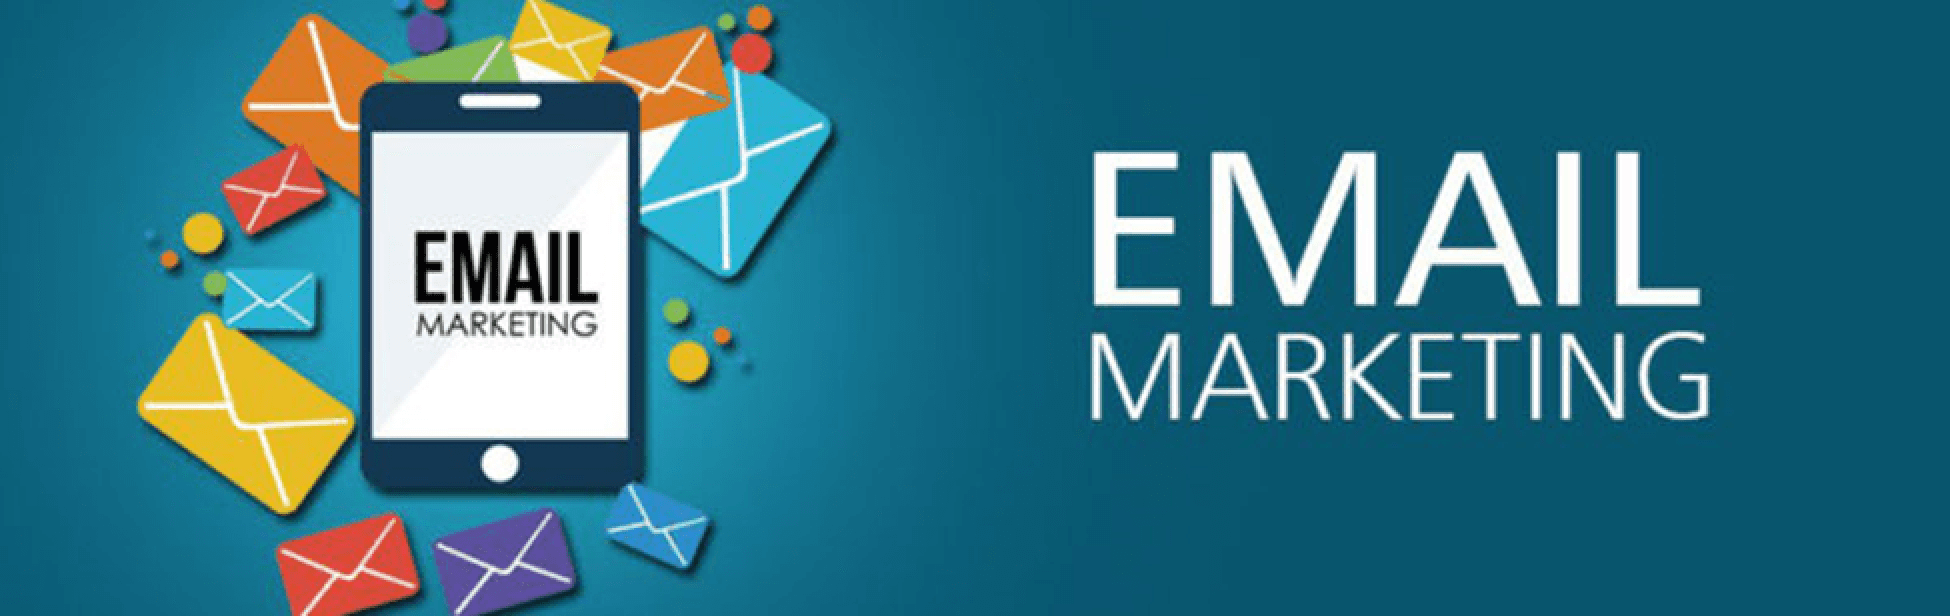 Best Email Marketing Company in Baghdad